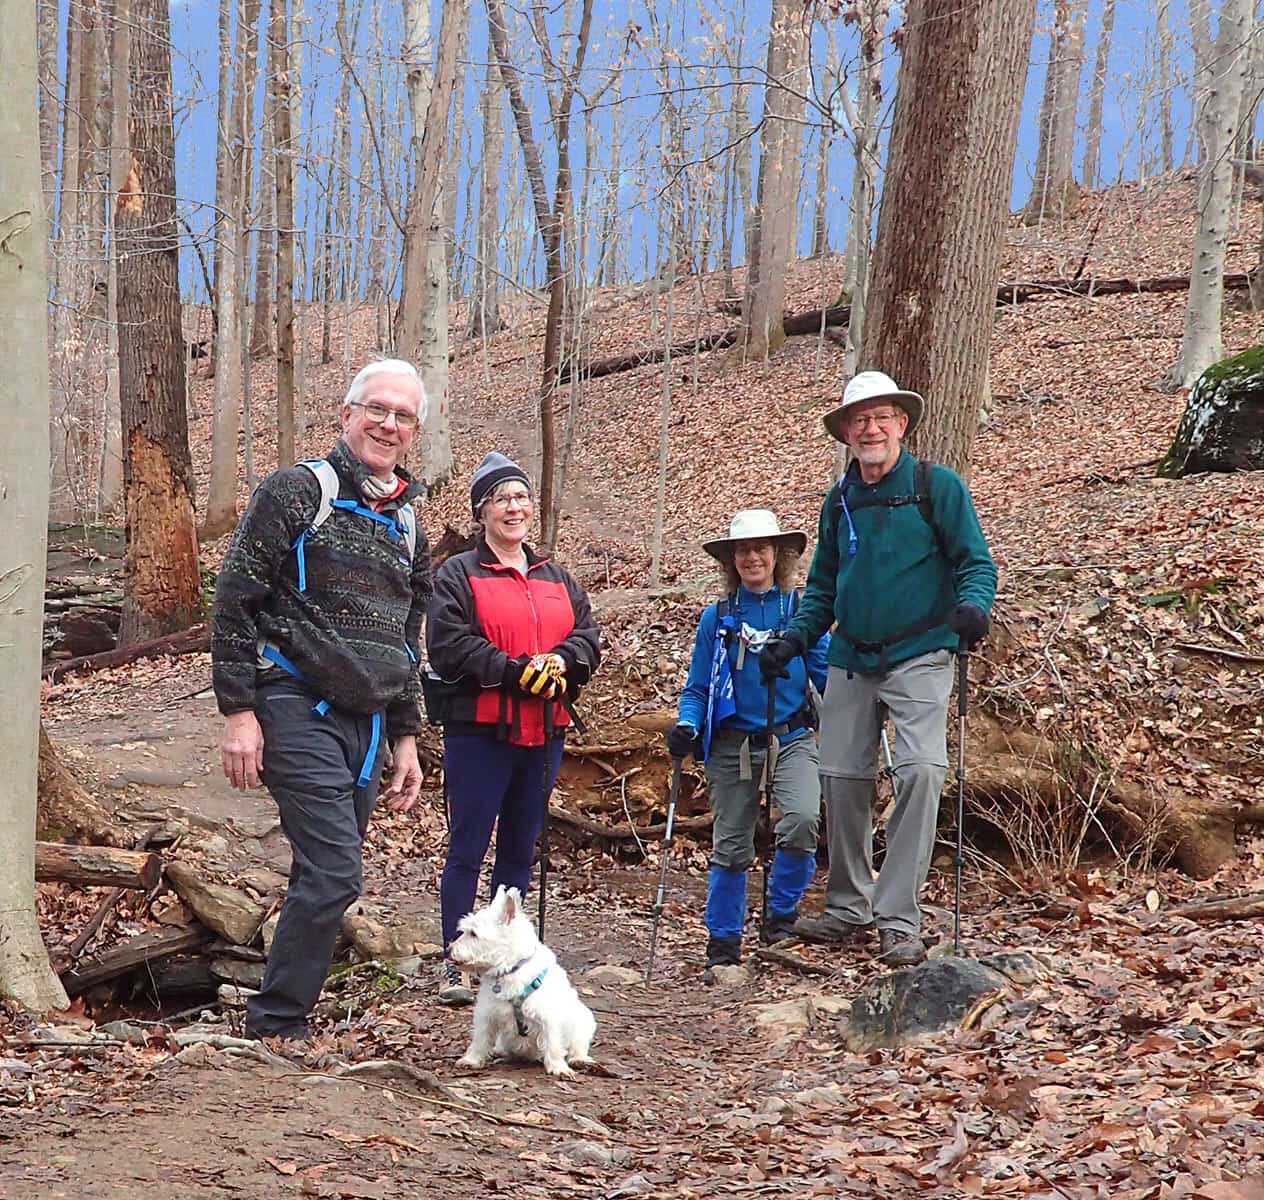 Four MCM members and a dog in the woods in autumn